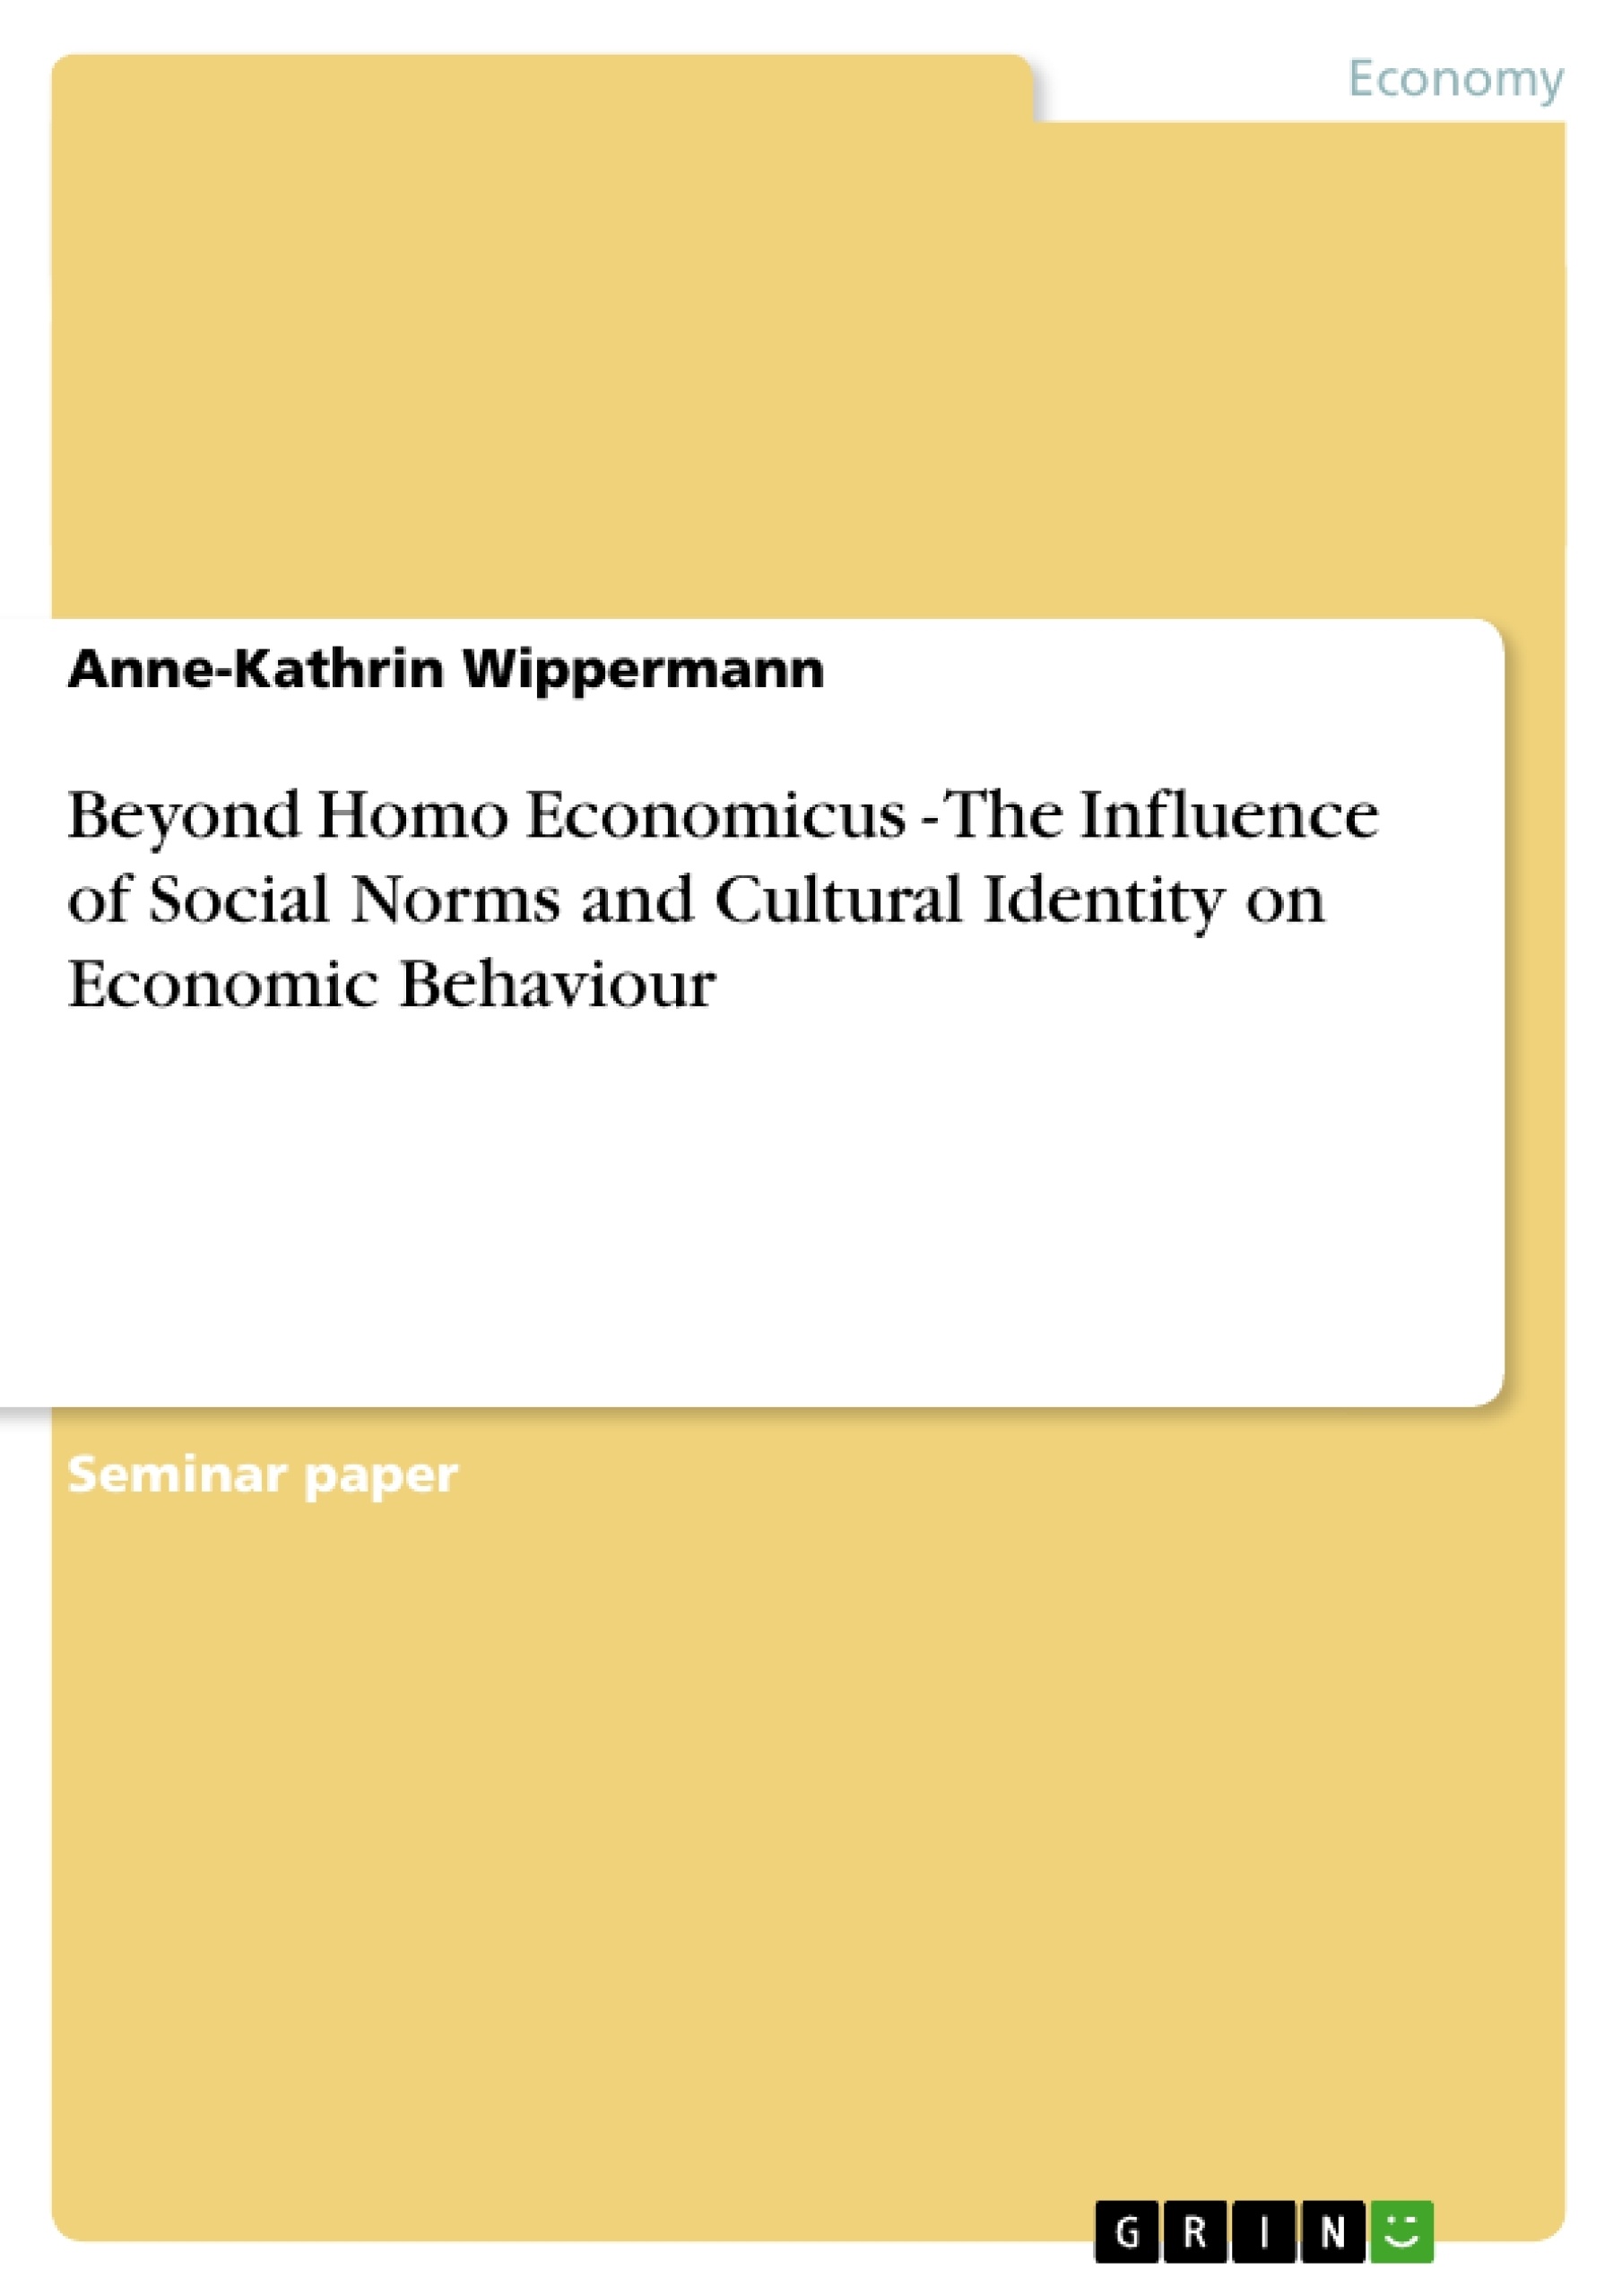 Title: Beyond Homo Economicus - The Influence of Social Norms and Cultural Identity on Economic Behaviour